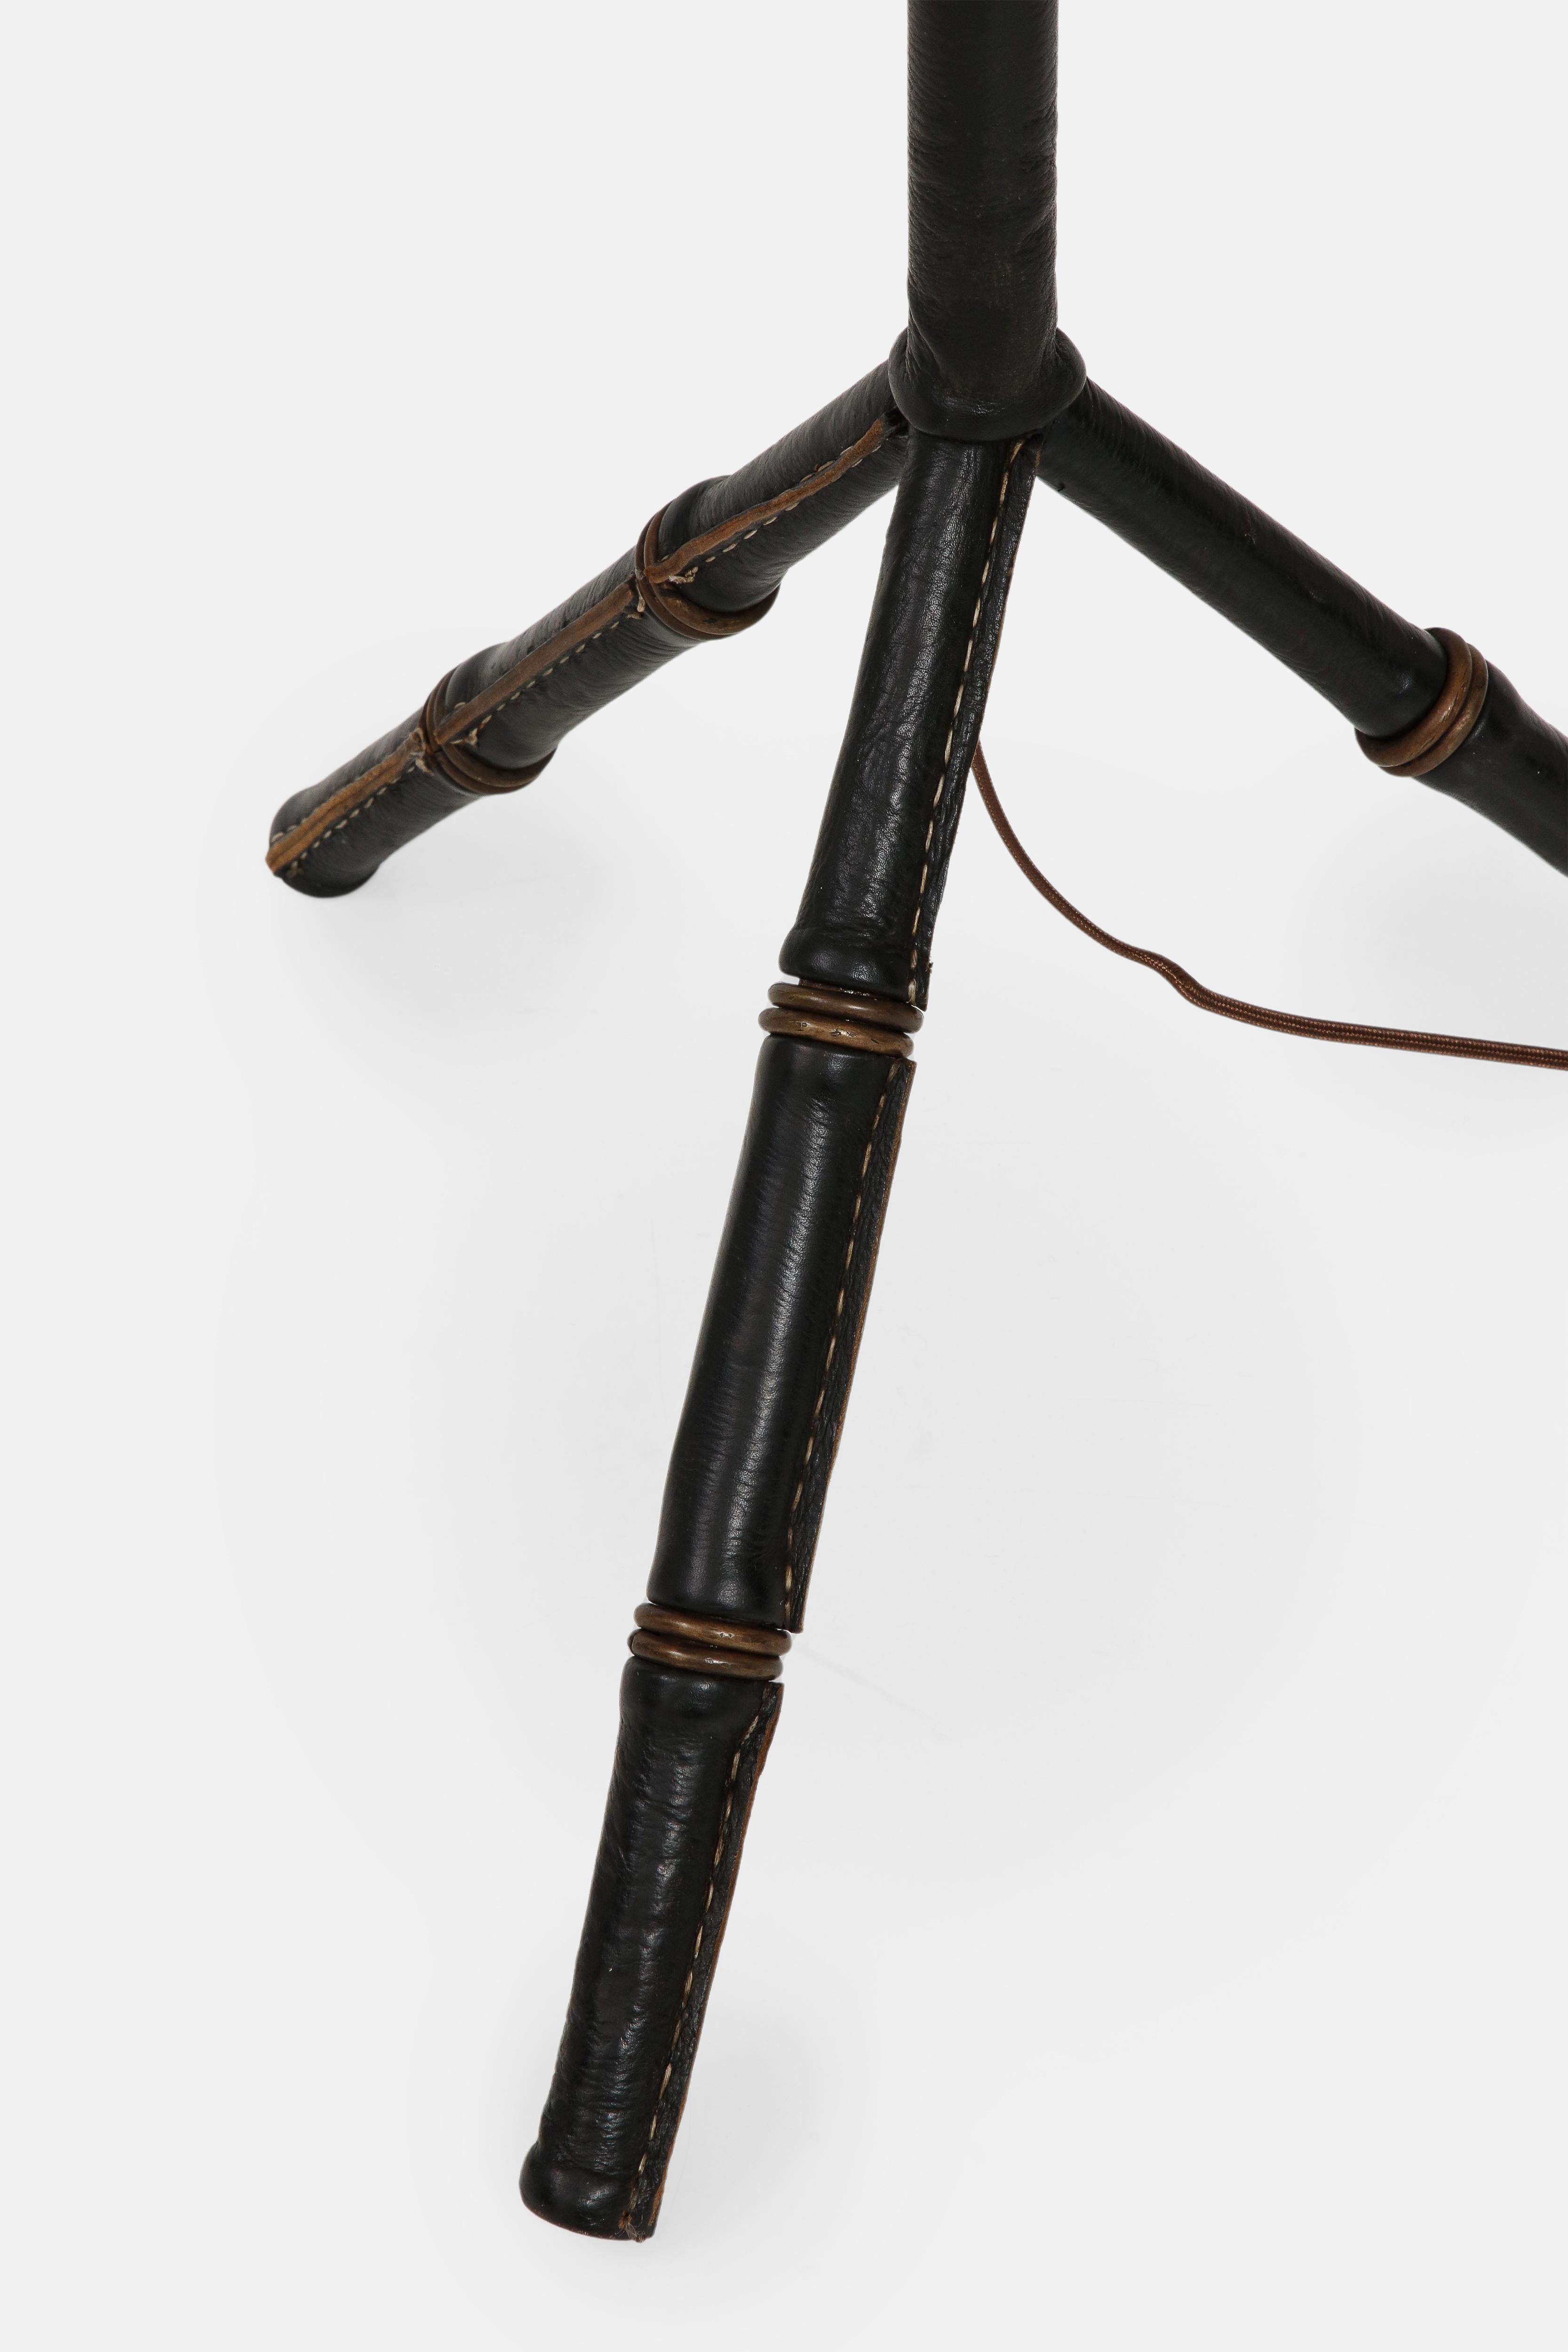 Jacques Adnet Black Leather Tripod Faux Bamboo Floor Lamp, 1950s For Sale 5